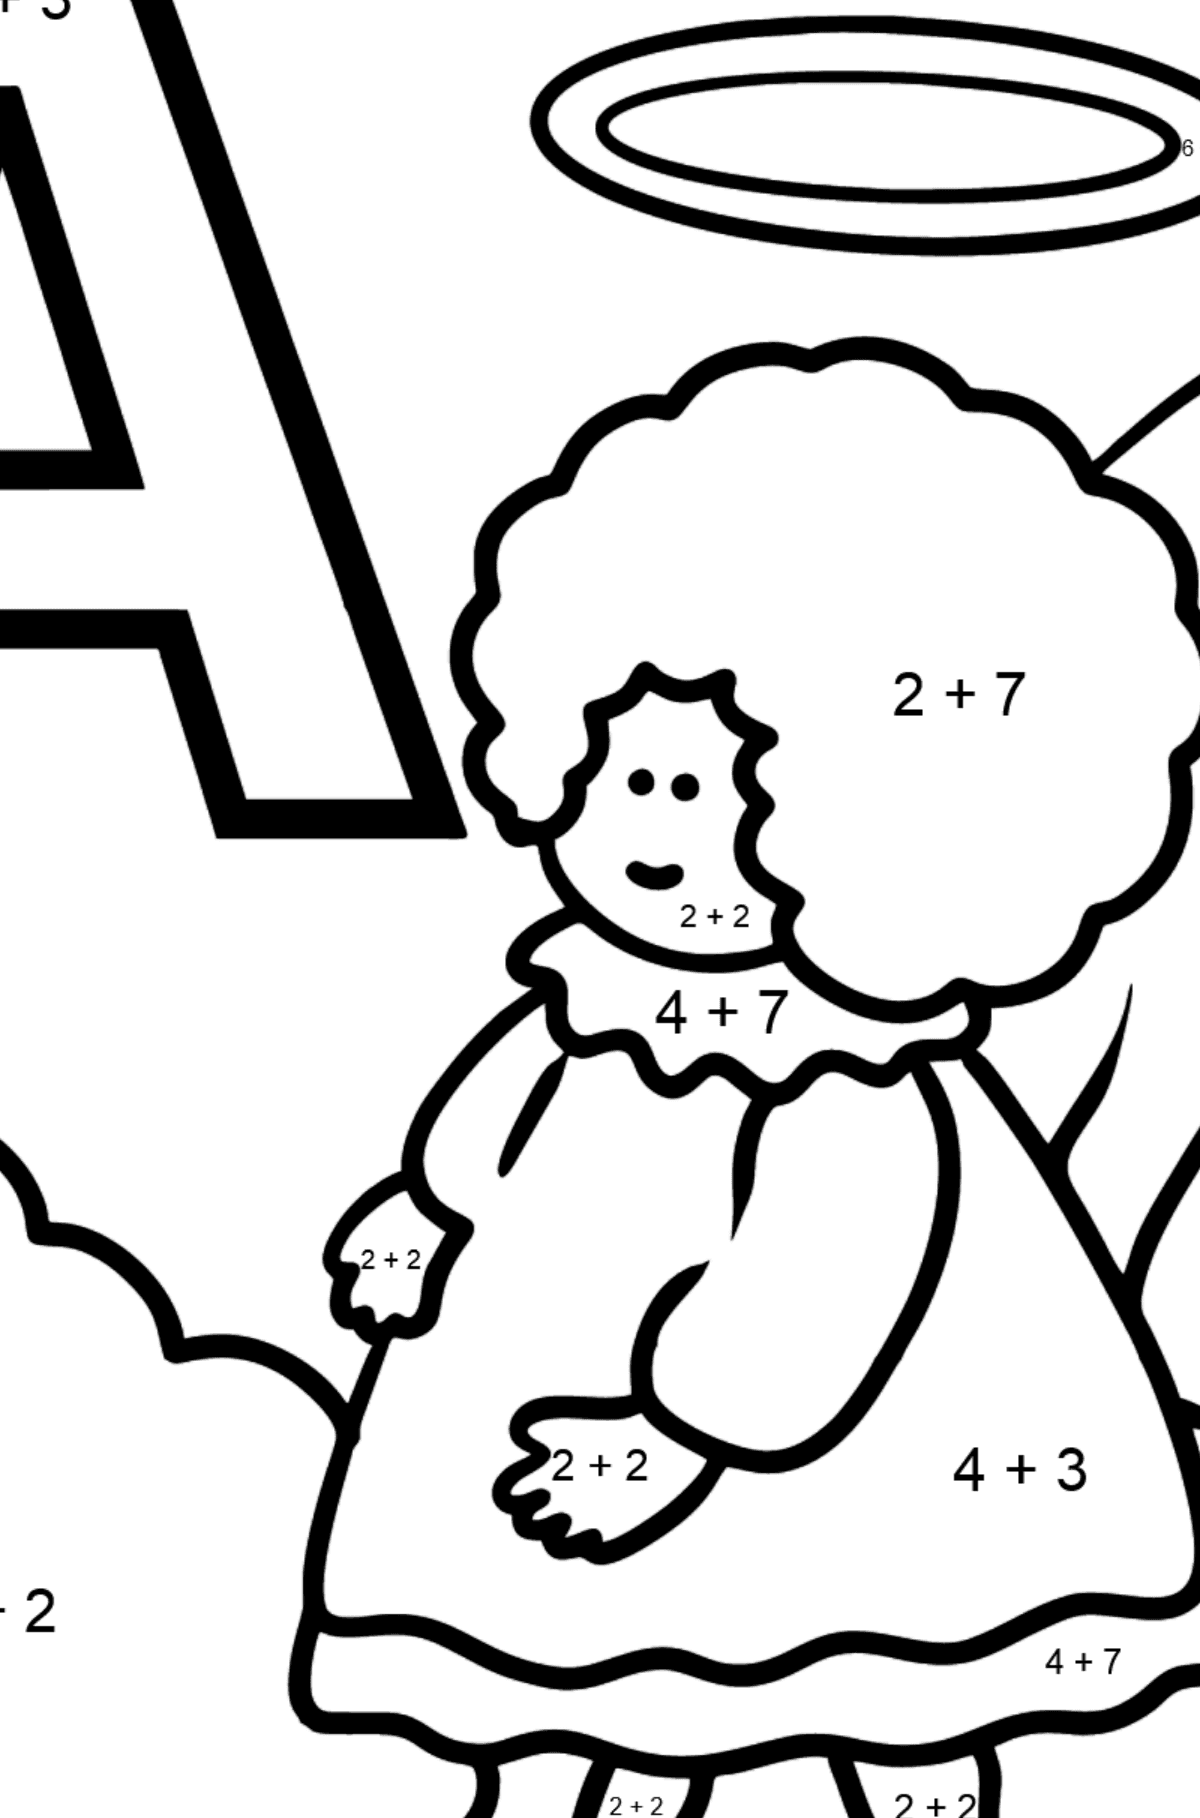 Portuguese Letter A coloring pages - ANJO - Math Coloring - Addition for Kids